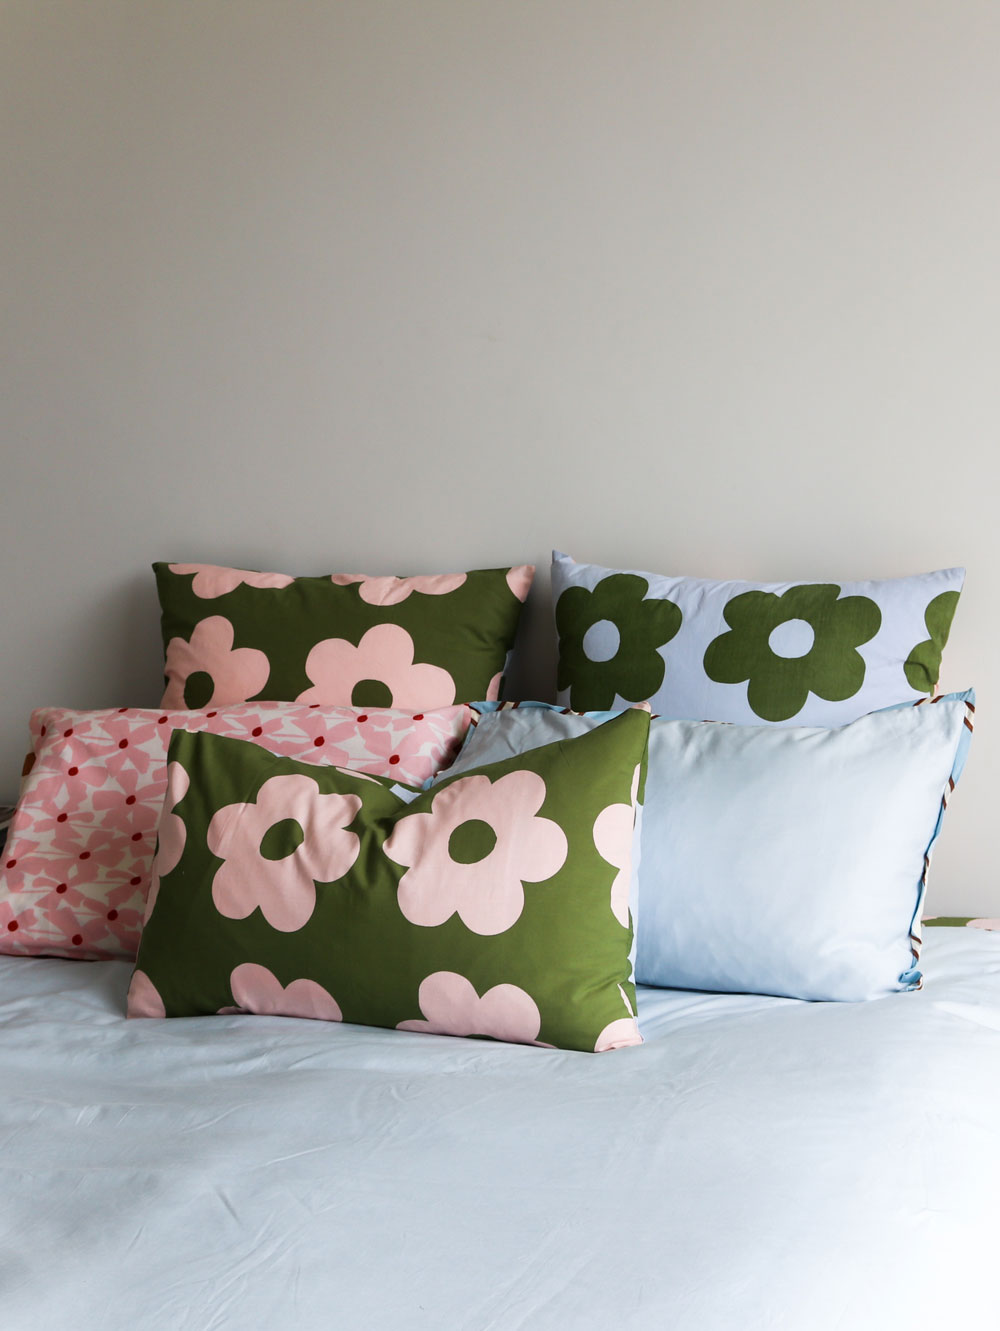 Flowerbed Euro Pillowcase Set  by Mosey Me